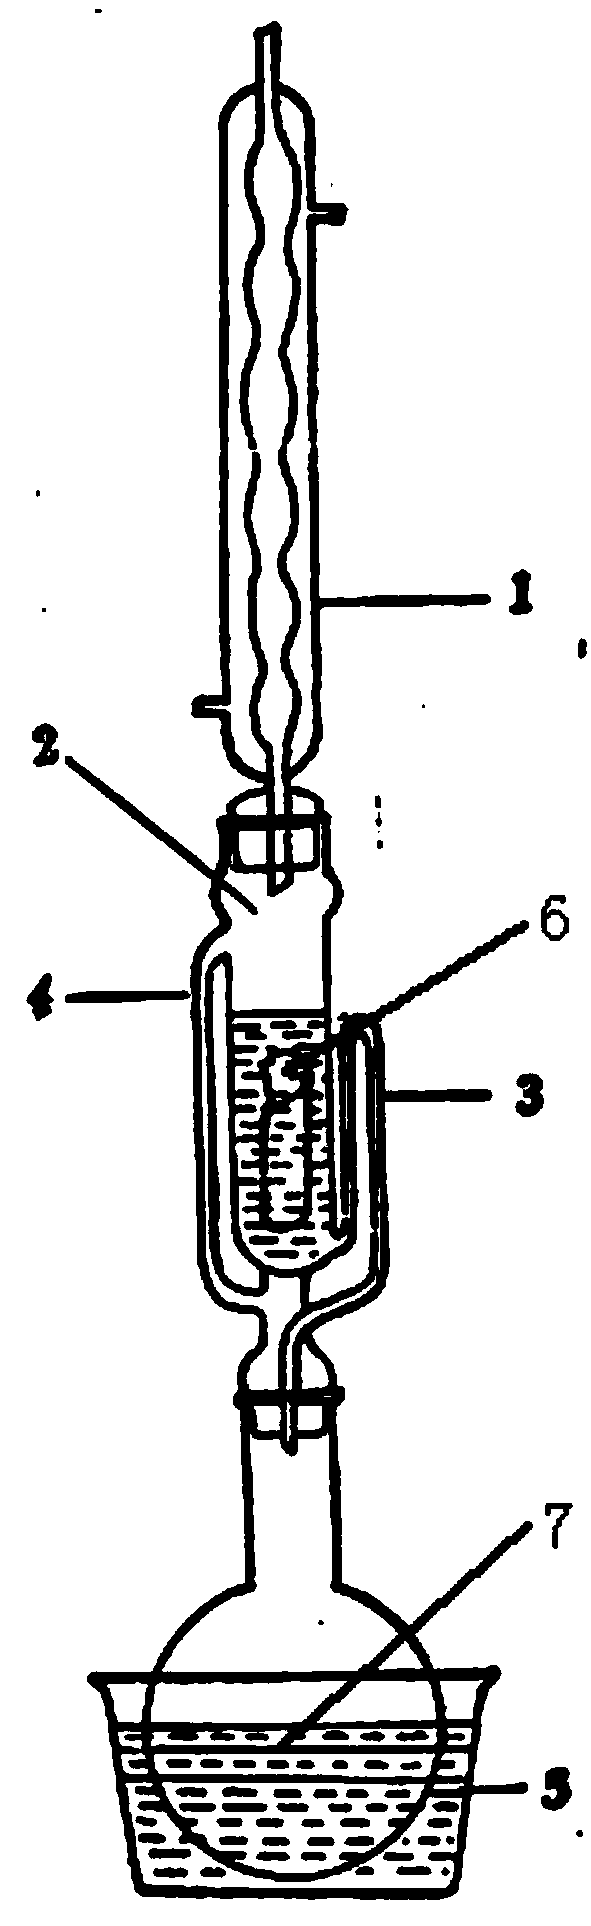 Method for preparing brandy by extracting aroma substances